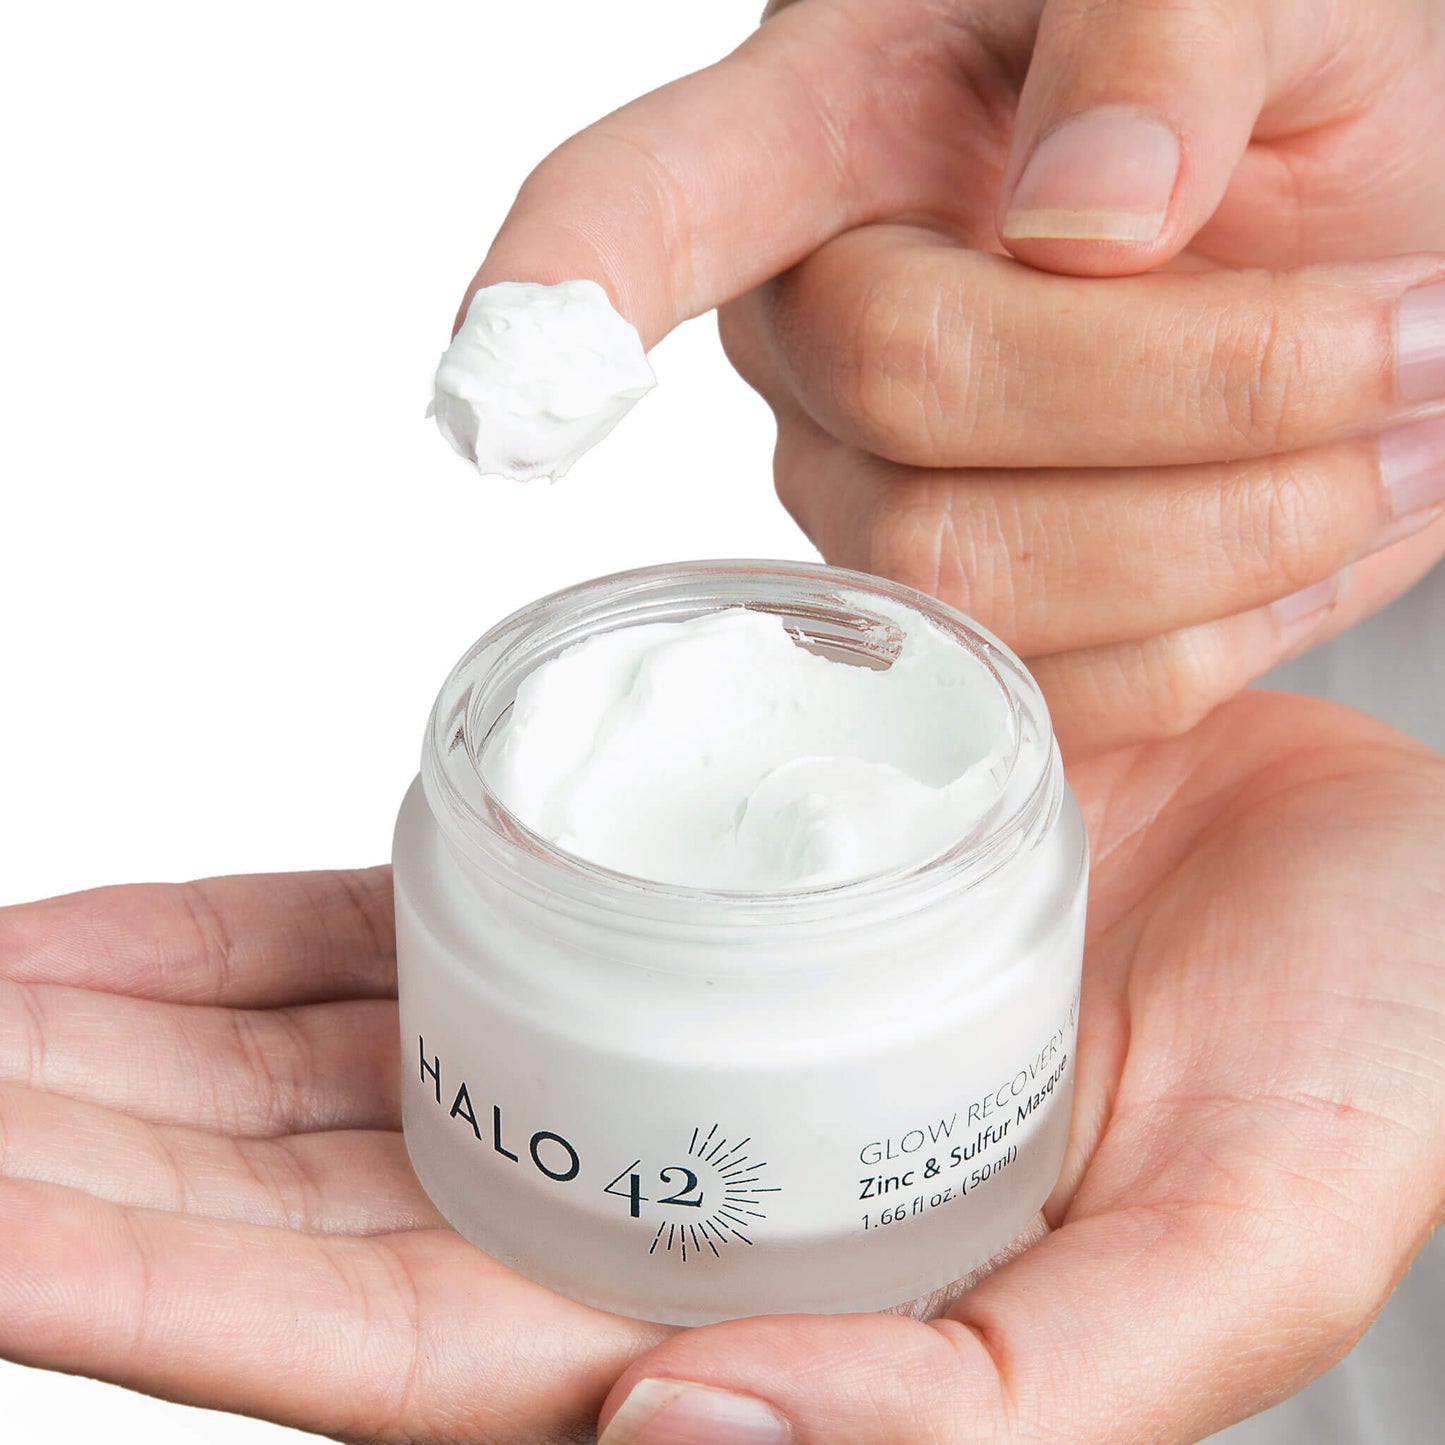 
                  
                    Halo42 Skincare Zinc and Sulfur mask showing finger dipping into product
                  
                